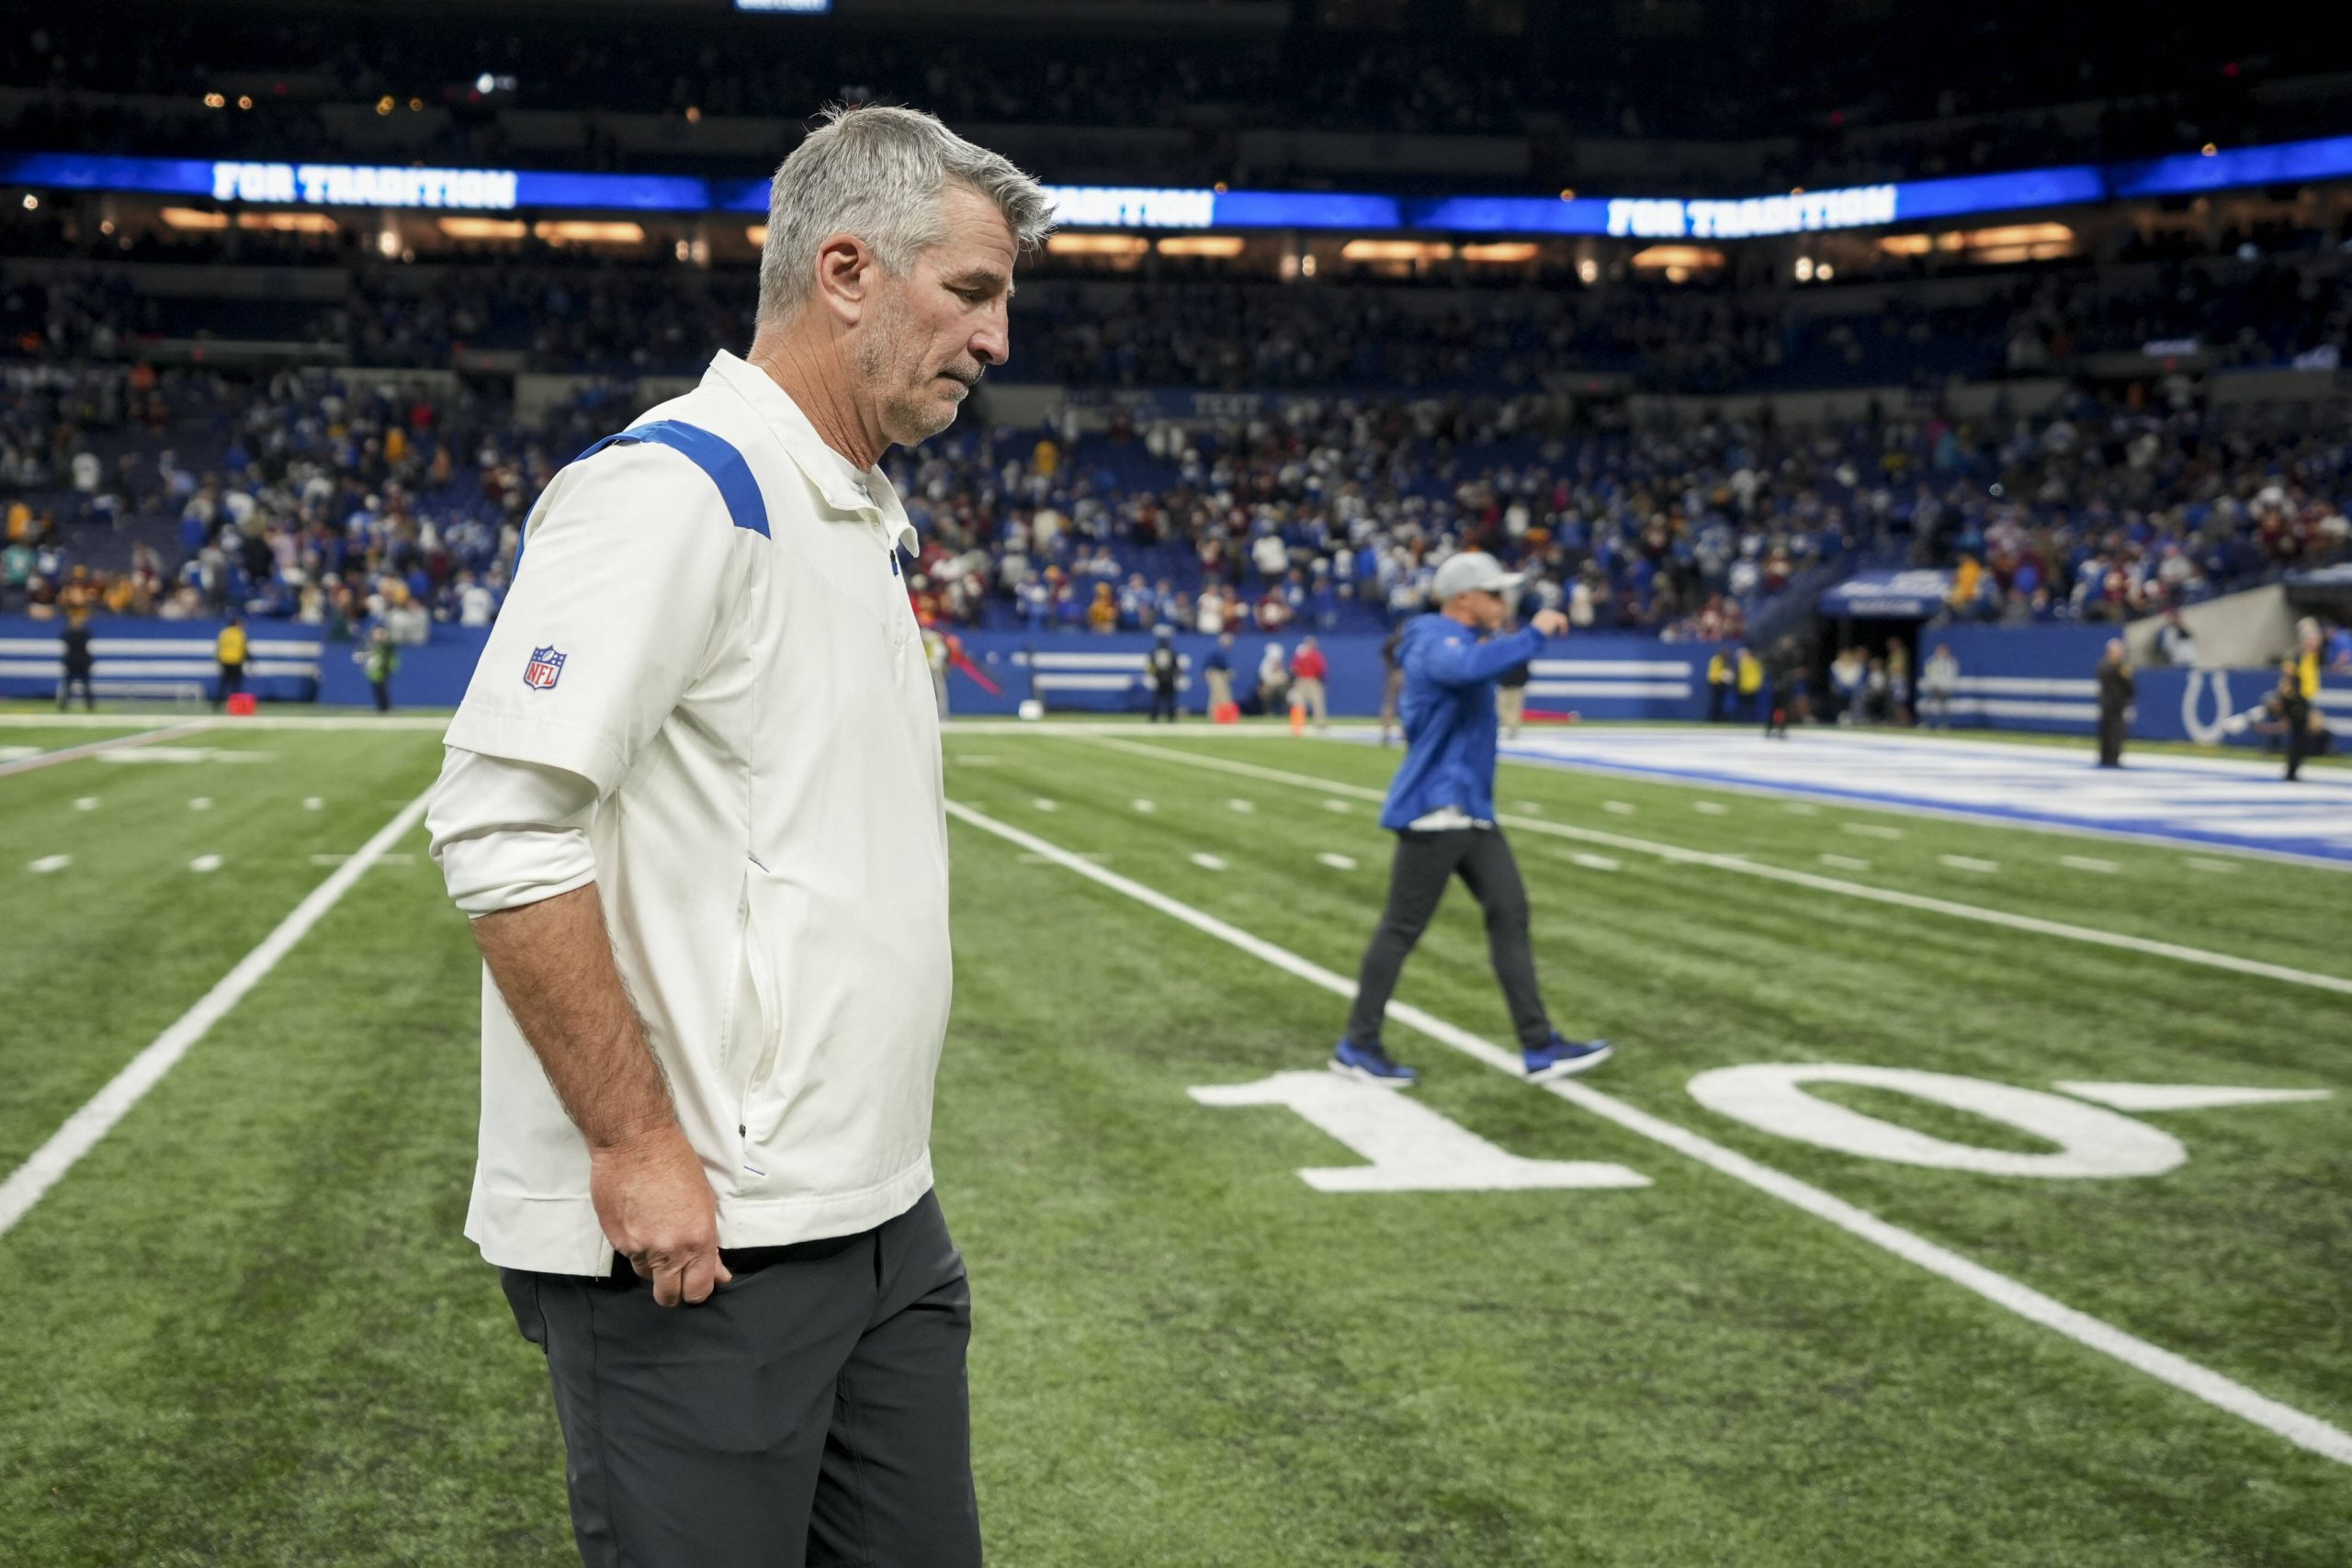 NFL, American Football Herren, USA Washington Commanders at Indianapolis Colts Oct 30, 2022 Indianapolis, Indiana, USA Indianapolis Colts head coach Frank Reich walks off the field after losing to the Washington Commanders 17-16 during a game against the Washington Commanders at Lucas Oil Stadium. Indianapolis Lucas Oil Stadium Indiana USA, EDITORIAL USE ONLY PUBLICATIONxINxGERxSUIxAUTxONLY Copyright: xJennaxWatsonx 20221030_JAB_xt8_017